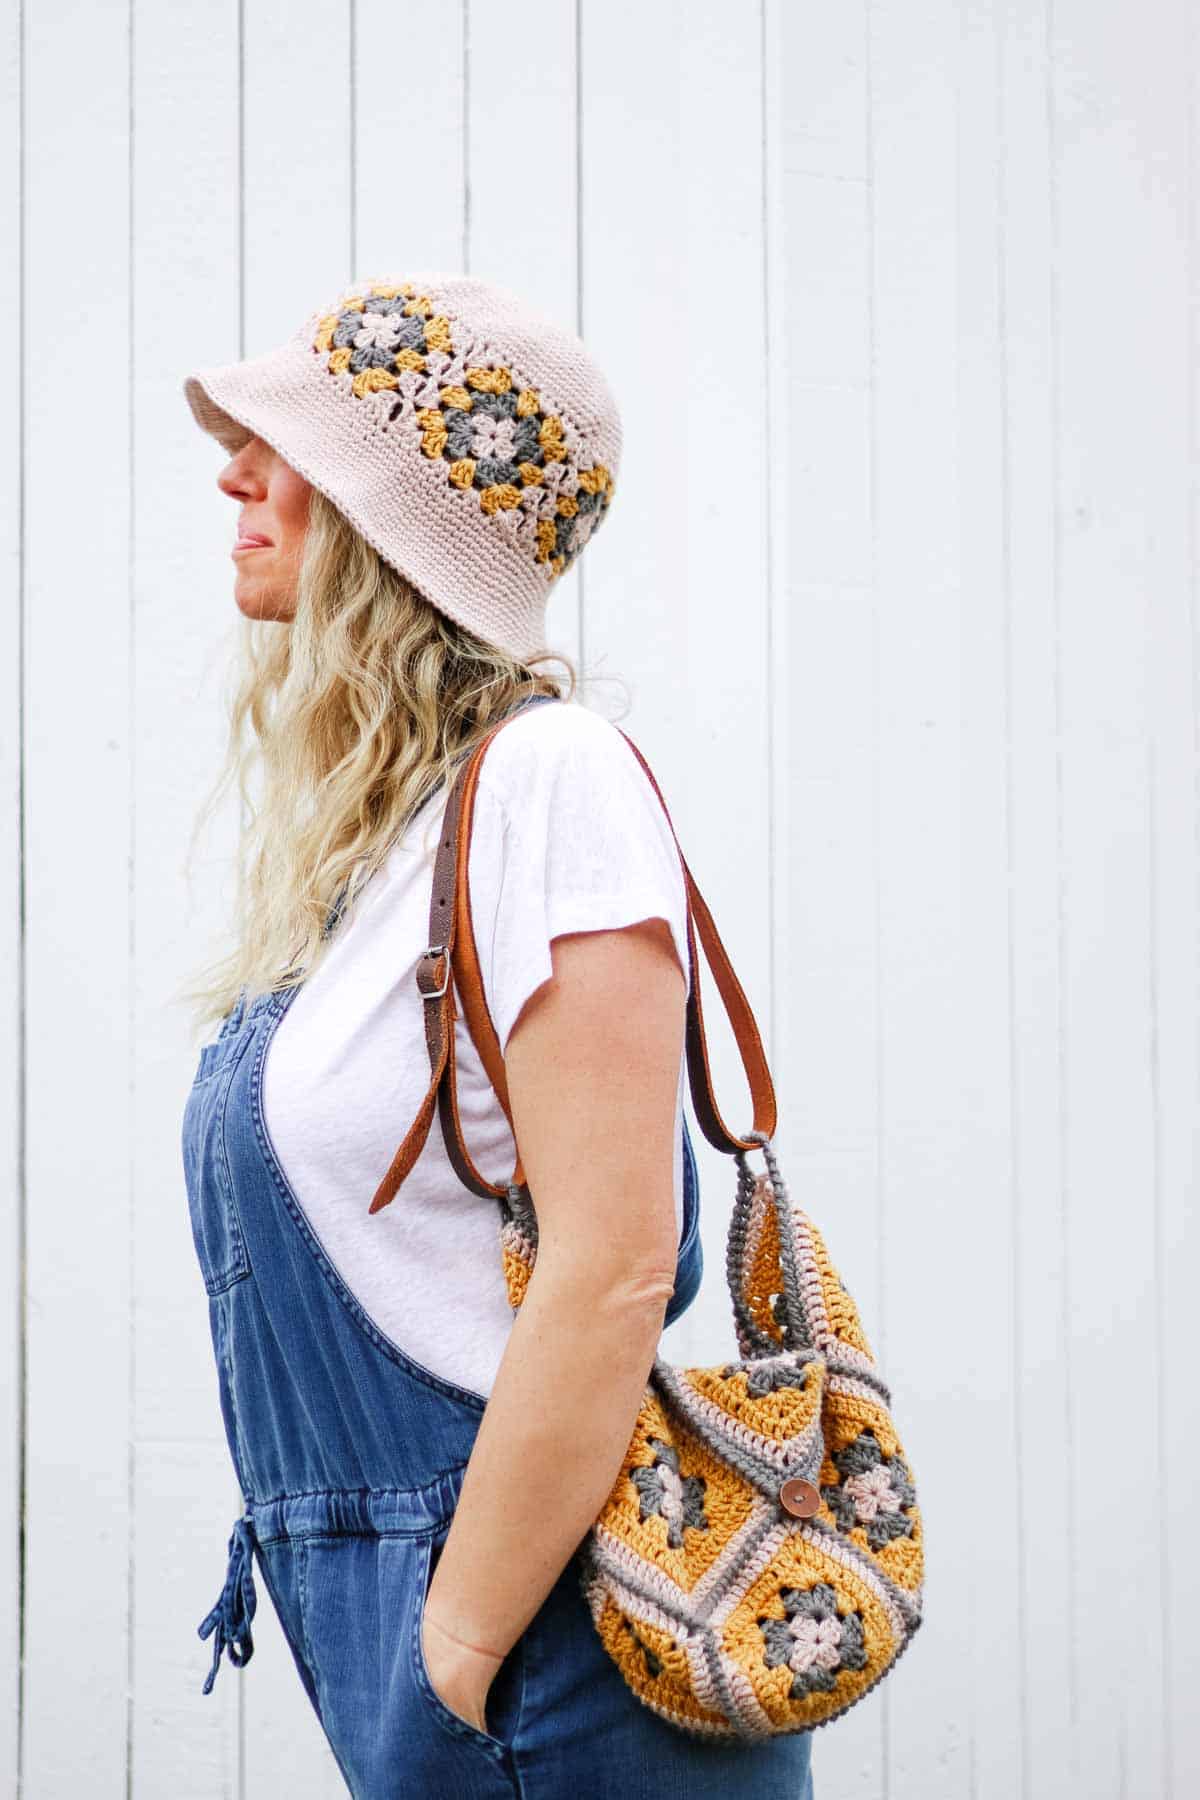 This image shows a woman with blonde hair wearing overalls, a white tee shirt, a crochet granny square hat and a crochet granny square purse with a leather strap. She is looking and facing left with her hand in her pocket.